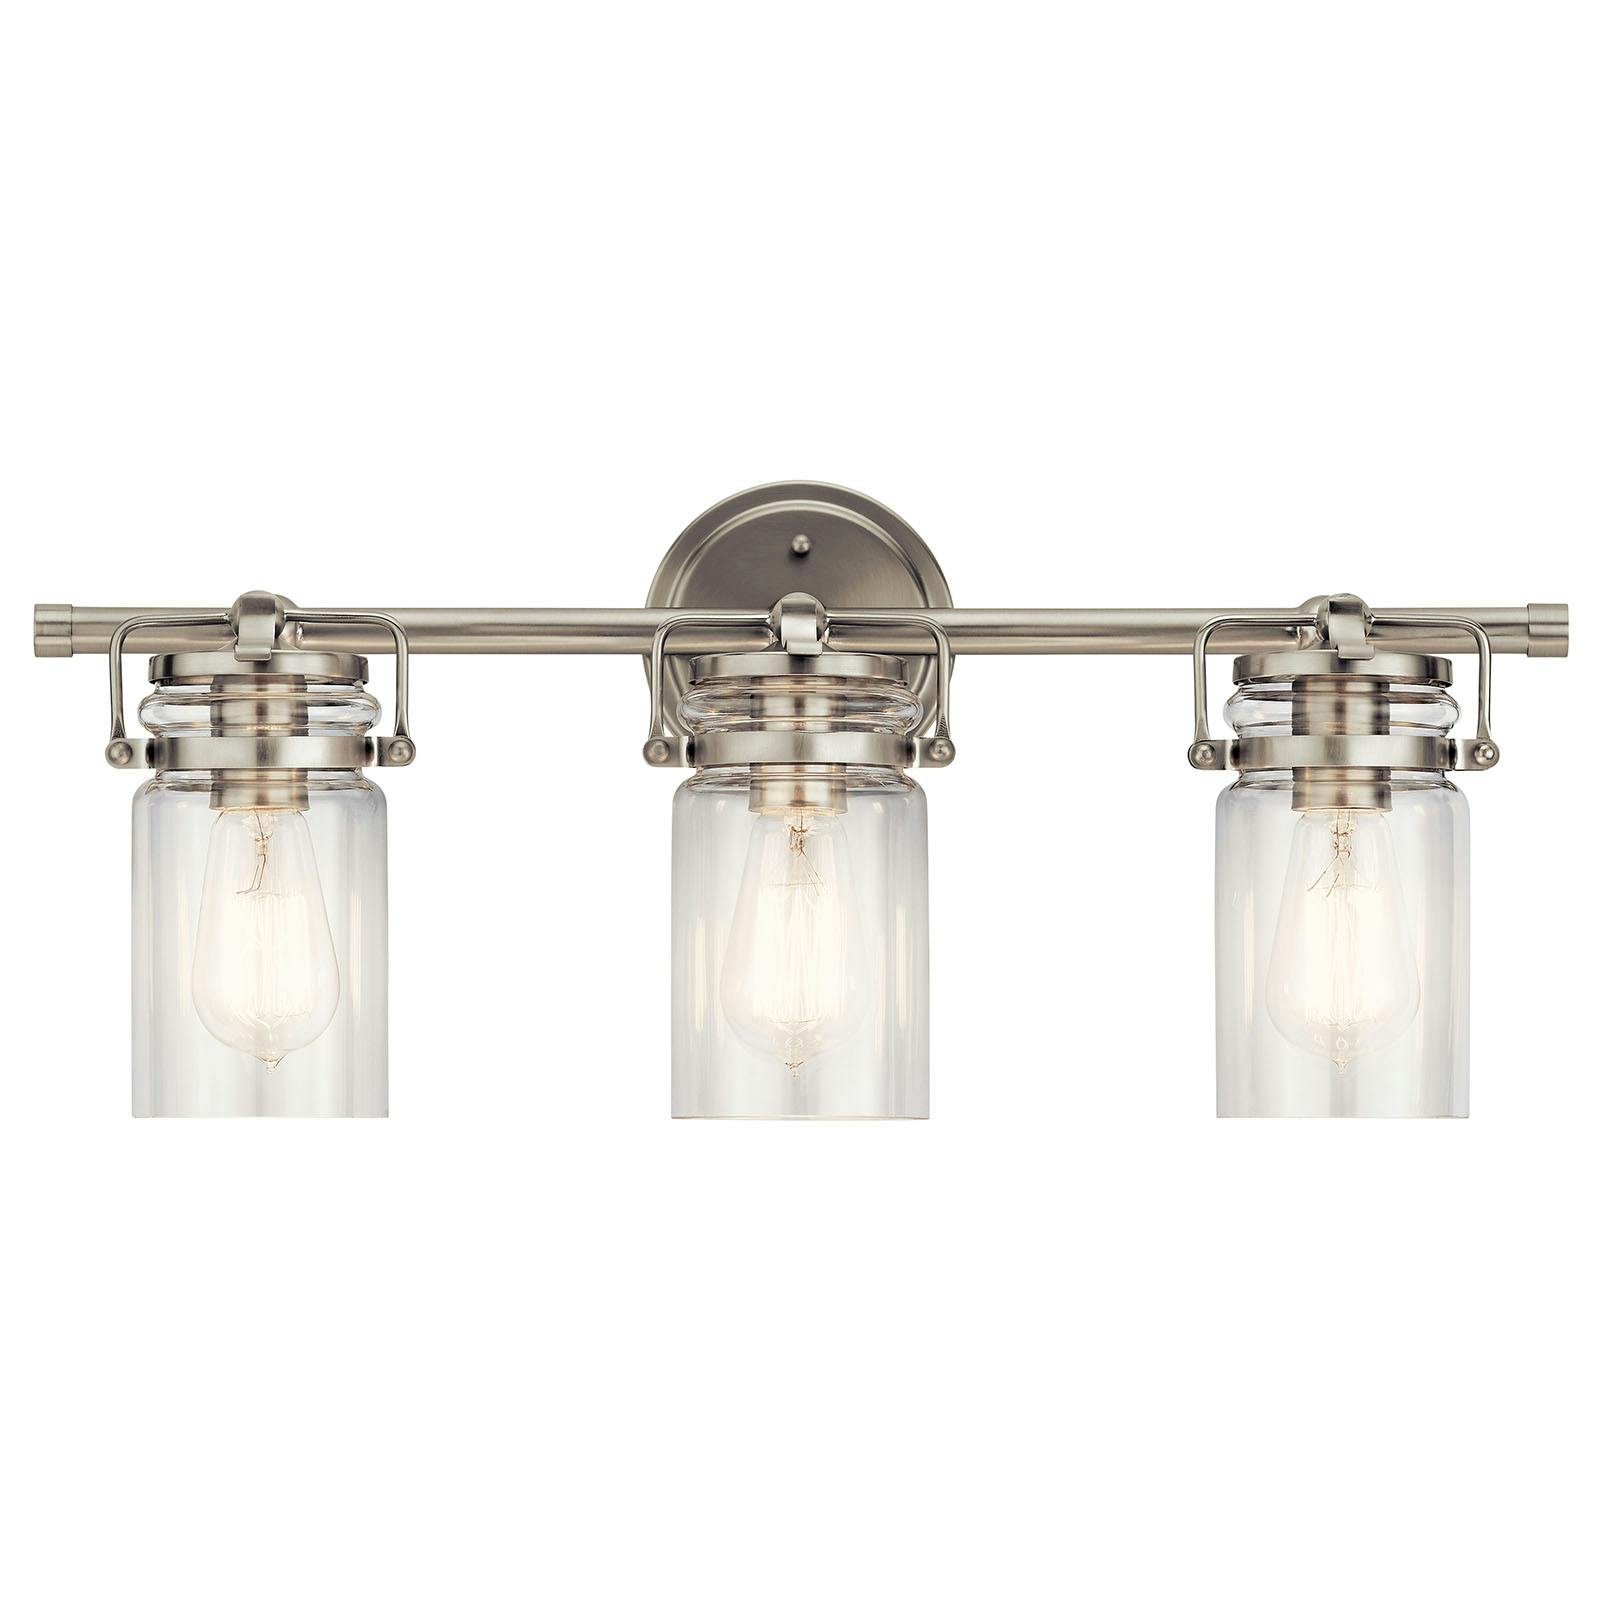 The Brinley 3 Light Vanity Light Nickel facing down on a white background